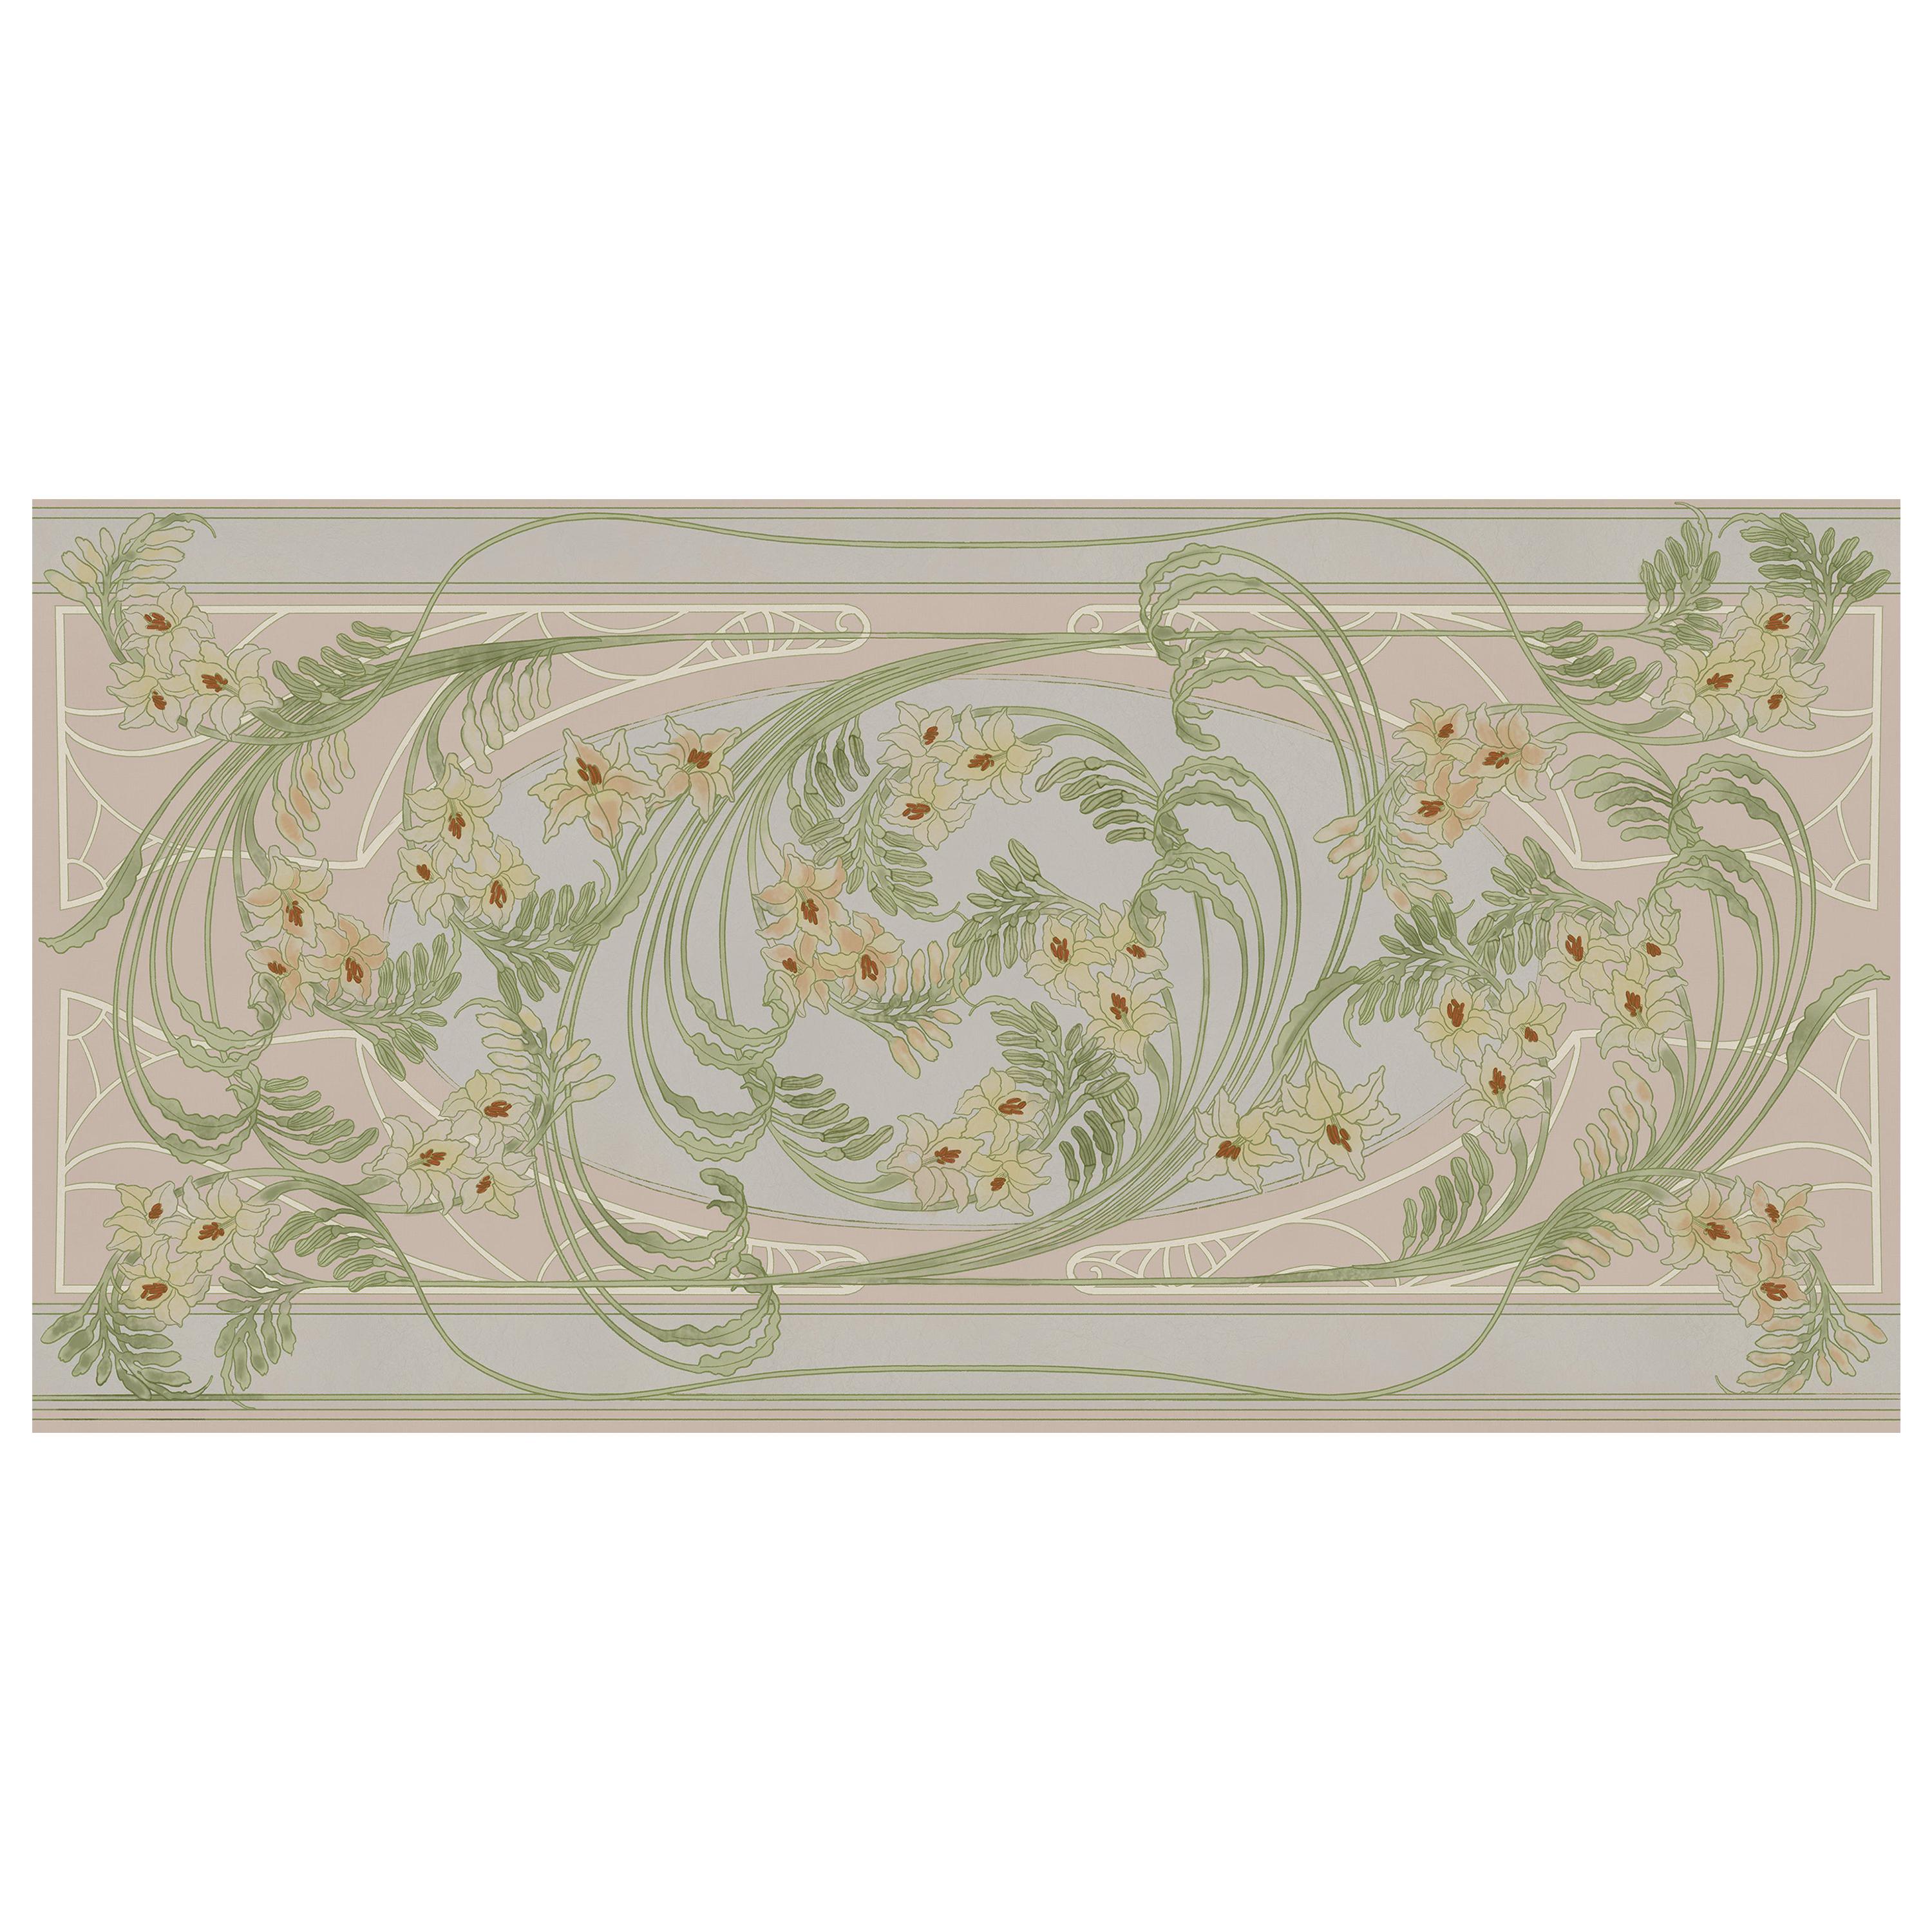 Ornami Art Nouveau Spring Vinyl Wallpaper Made in Italy Digital Printing For Sale